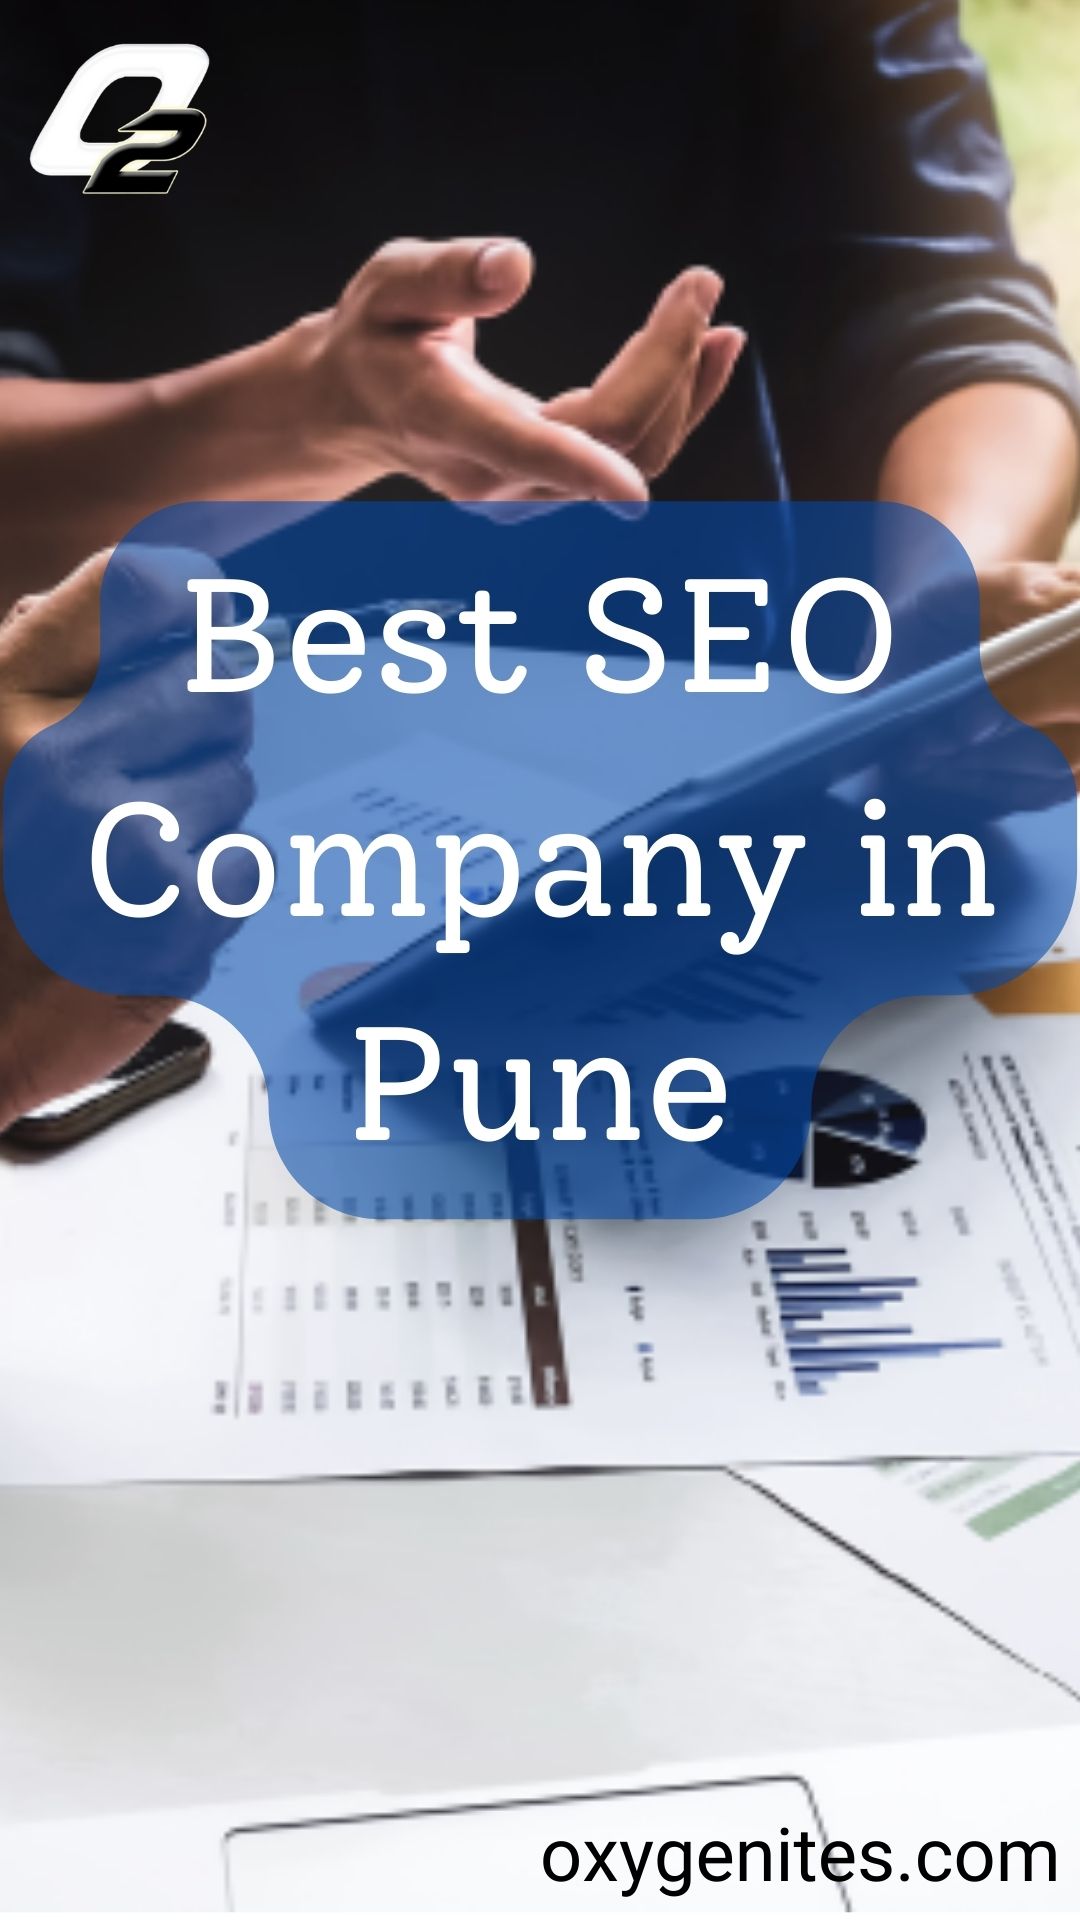 Best SEO Company in Pune<br />
